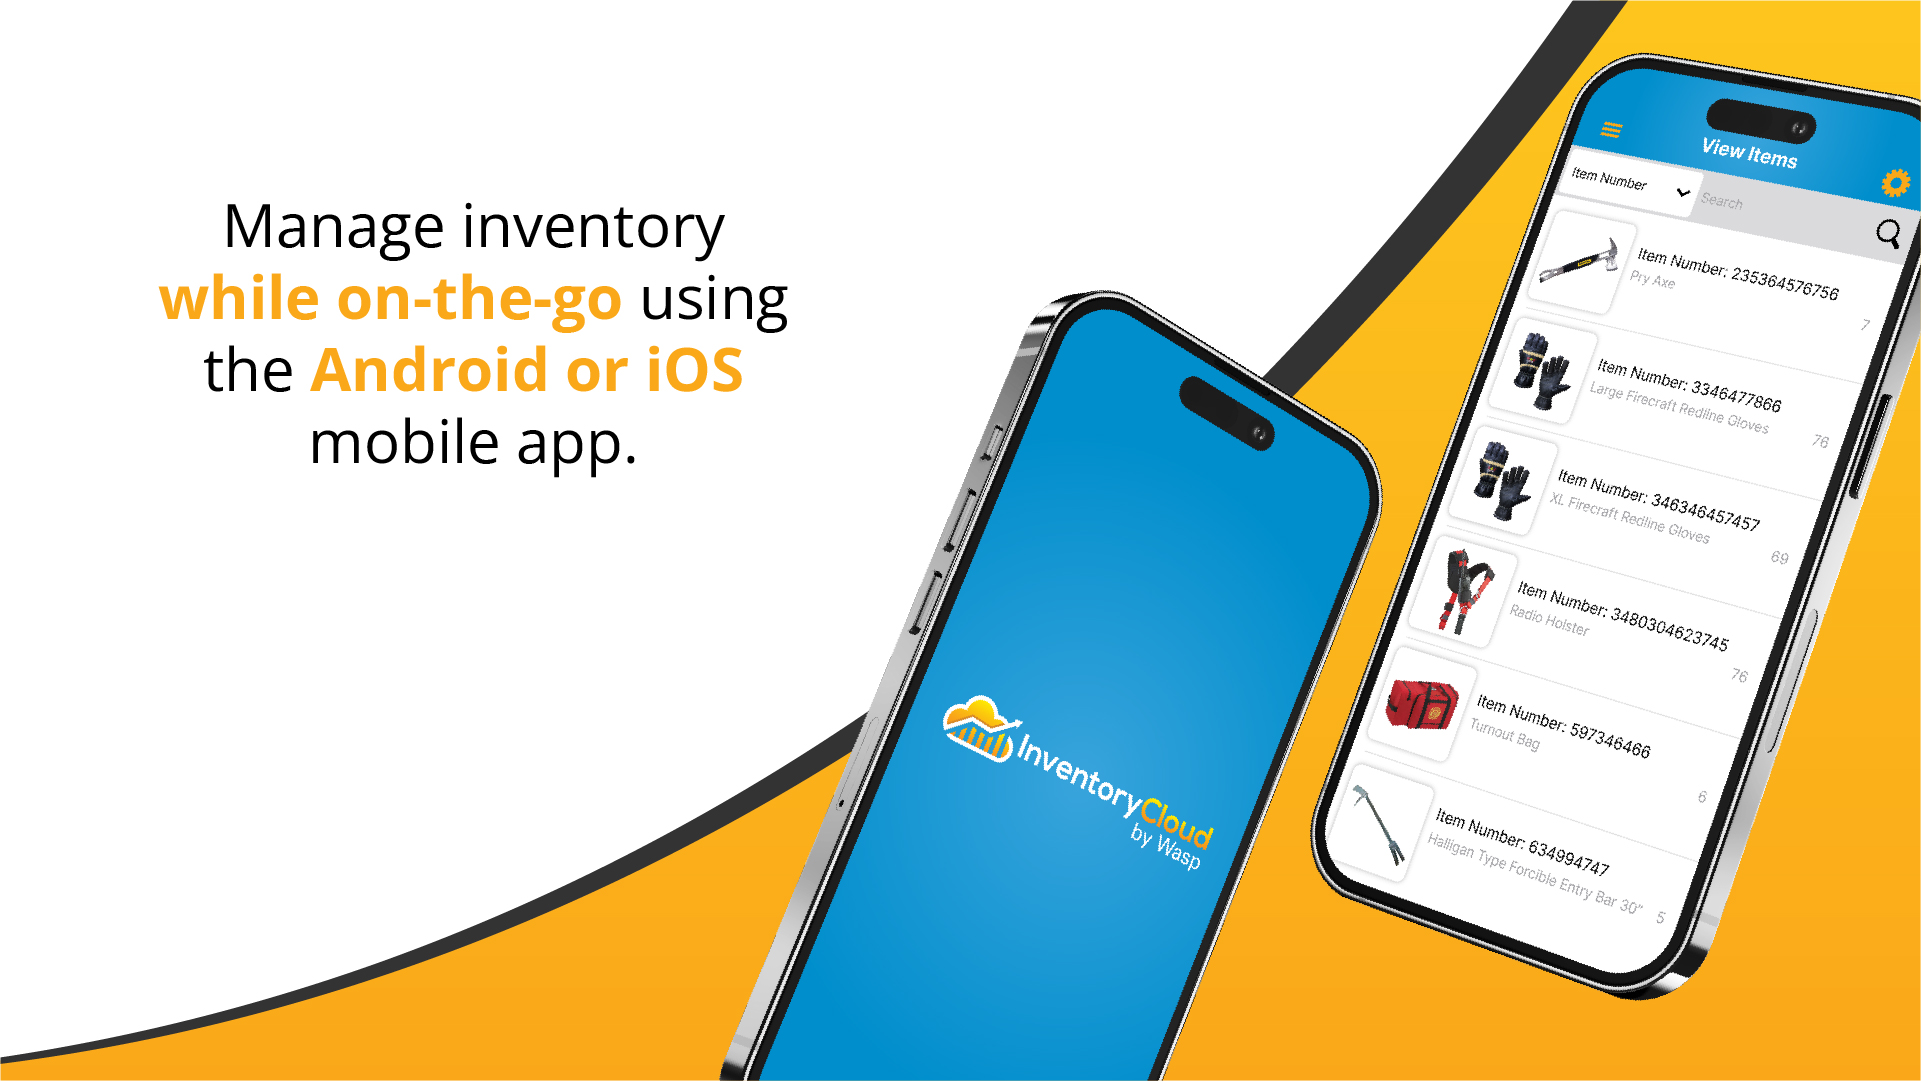 Manage inventory while on-the-go using the Android or iOS mobile app